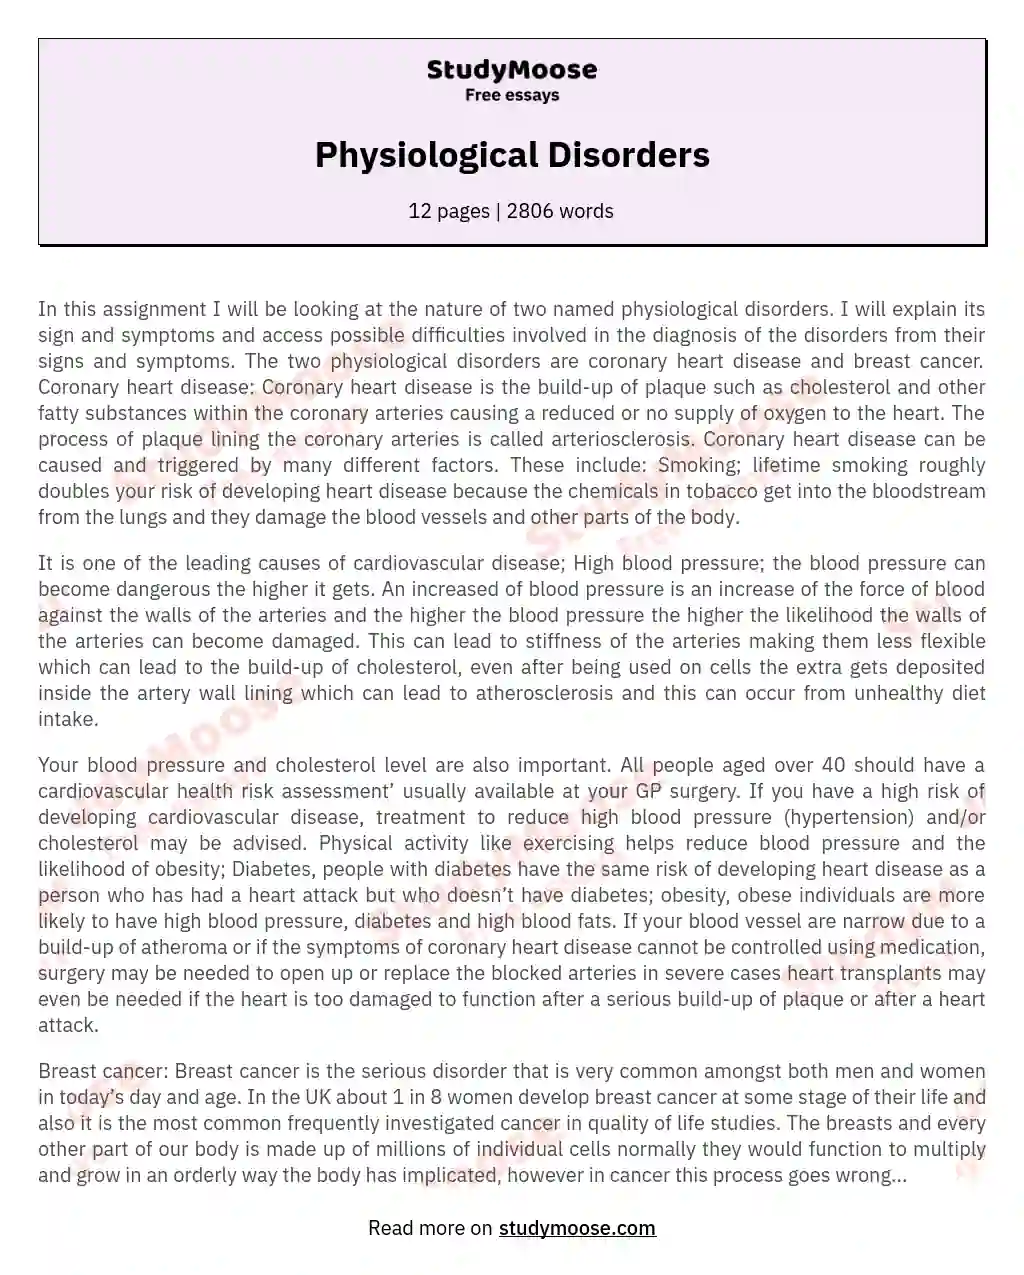 Physiological Disorders essay